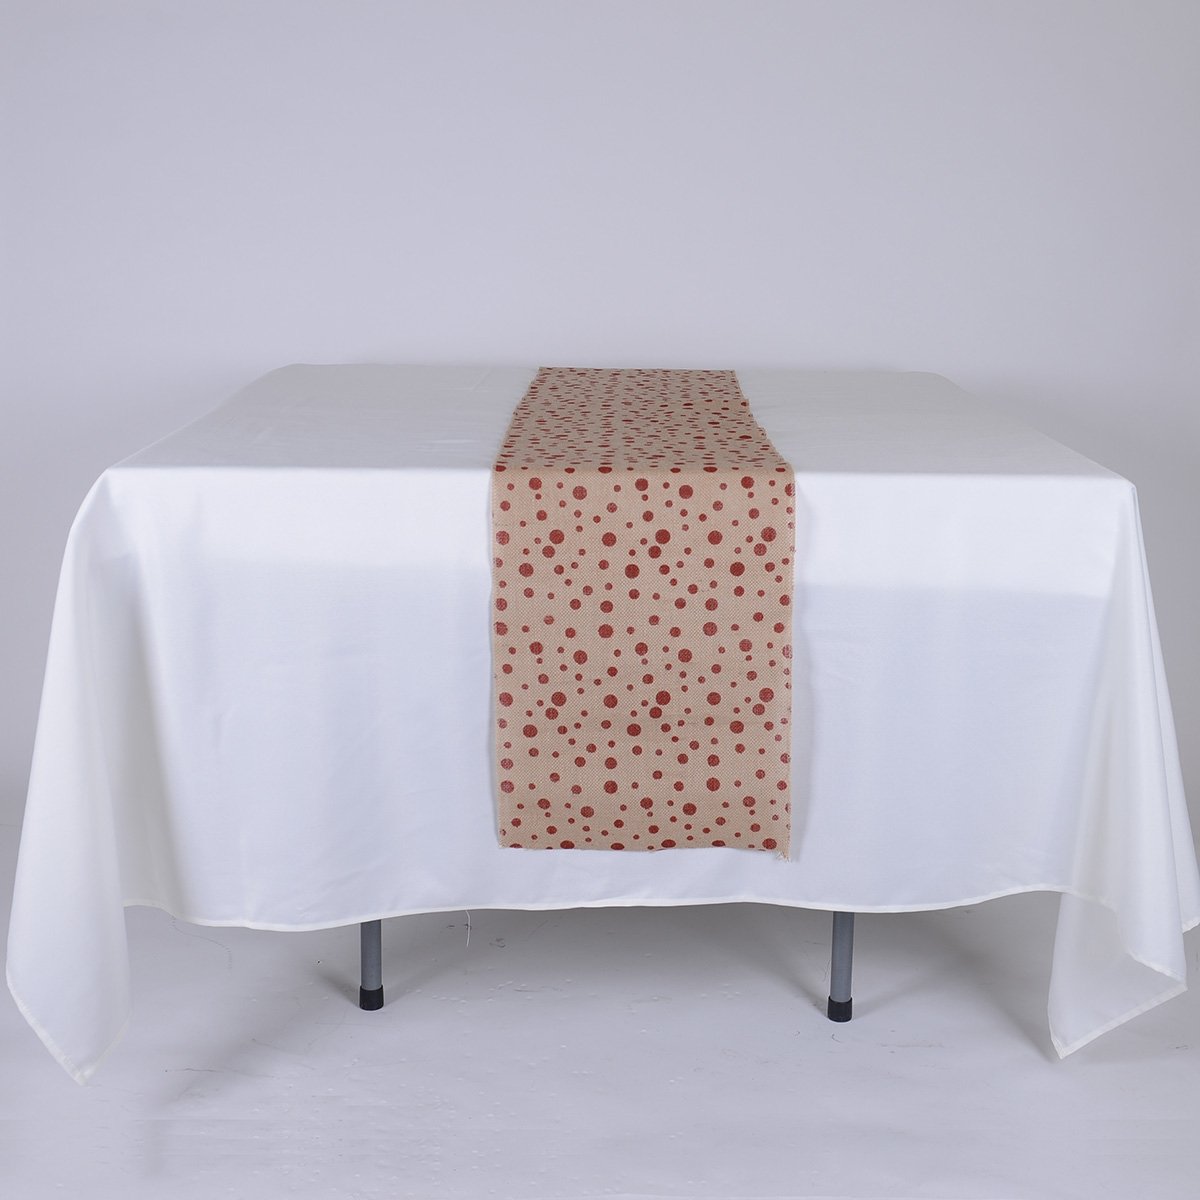 Red Dots - Burlap Table Runner ( 14 inch x 108 inches )